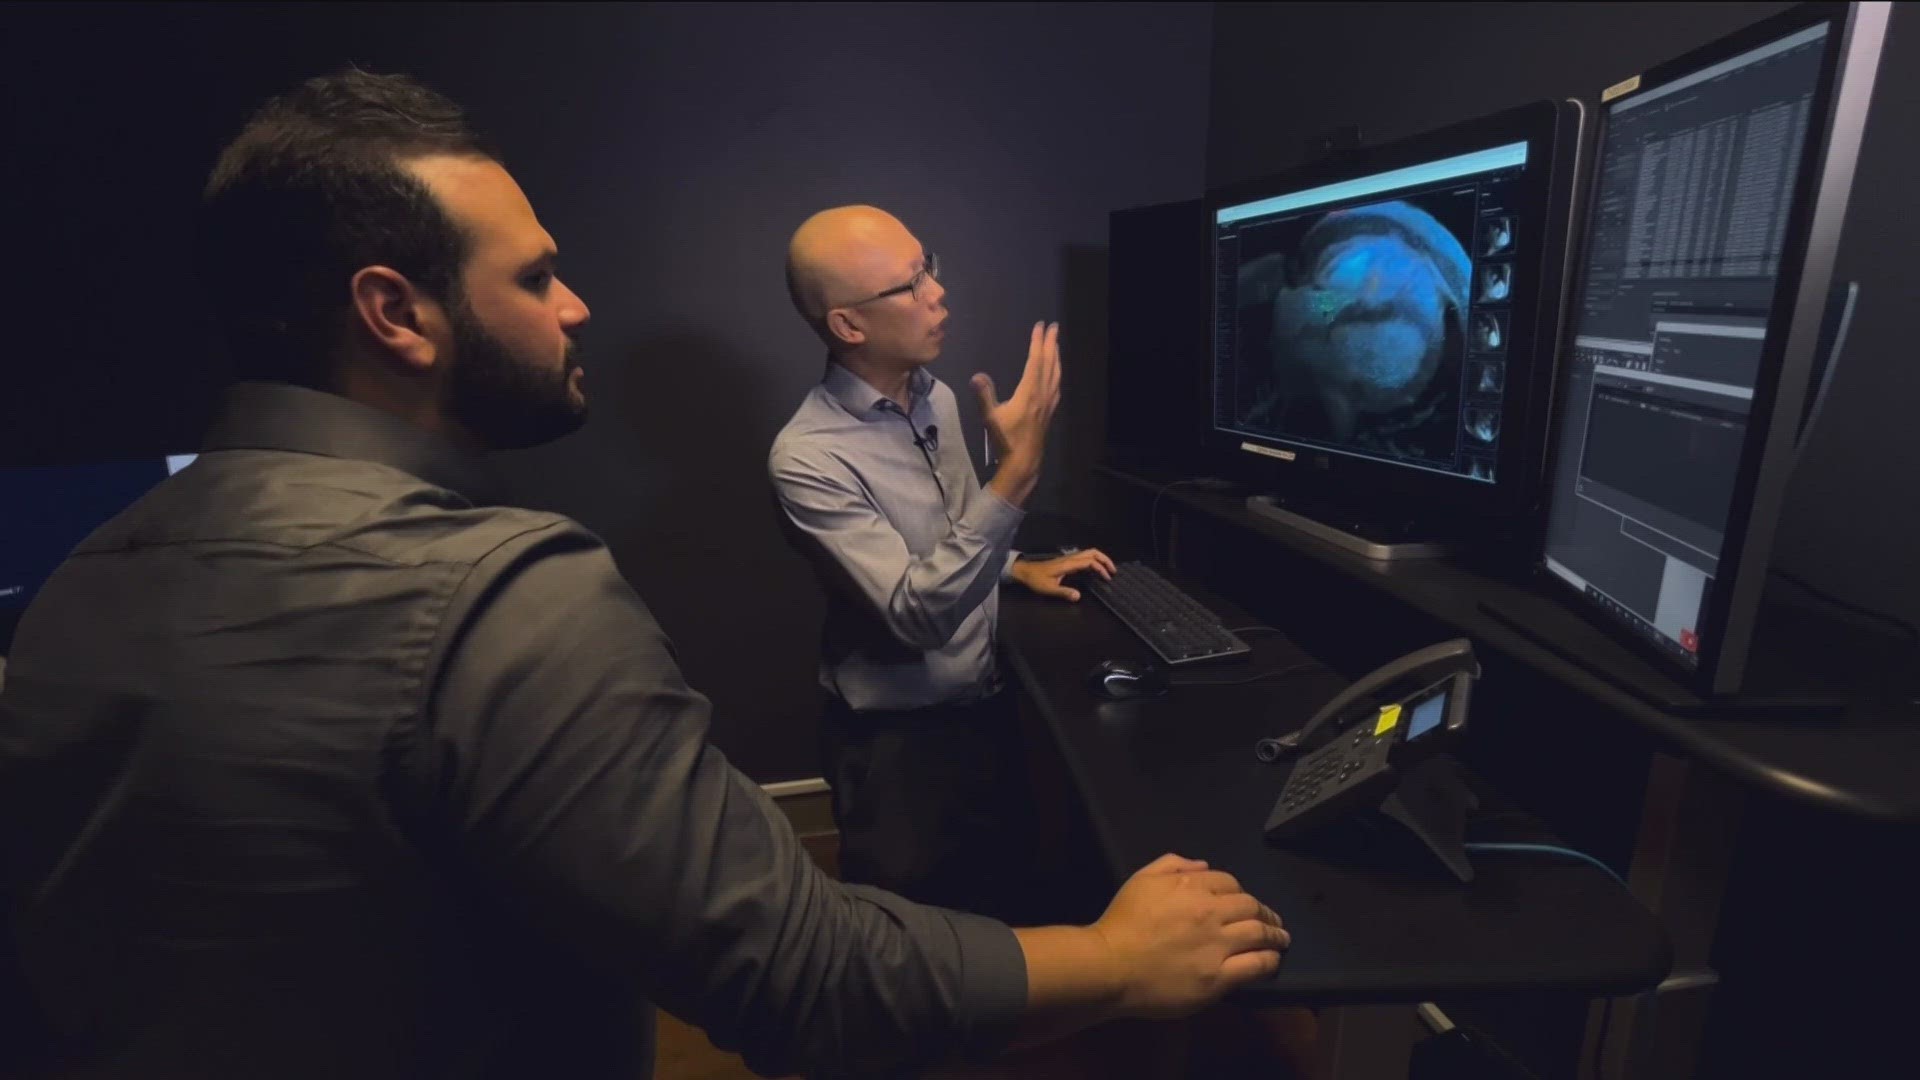 Administrators and doctors at the Jacobs Medical Center at UCSD Health in La Jolla are leading experimenting and integrating AI into the healthcare experience.